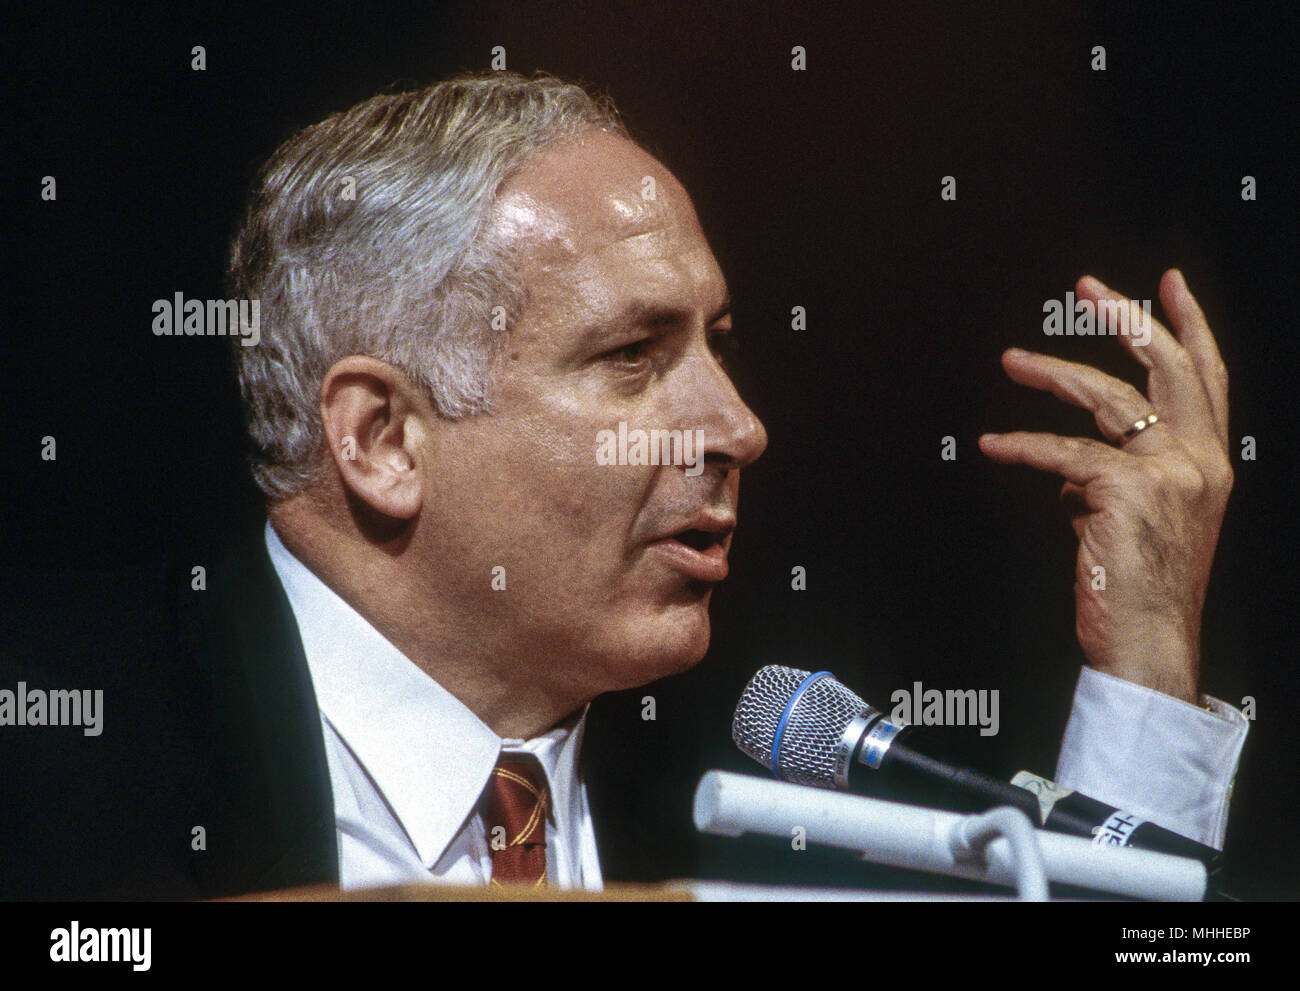 Washington, DC. USA, 14th May, 1998 Israeli Prime Minister Benjamin Netanyahu during an address to the Washington Institute for Near East Policy. Benjamin 'Bibi' Netanyahu is the current Prime Minister of Israel. He also currently serves as a member of the Knesset and Chairman of the Likud party. Born in Tel Aviv to secular Jewish parents, Netanyahu is the first Israeli prime minister born in Israel after the establishment of the state. Stock Photo